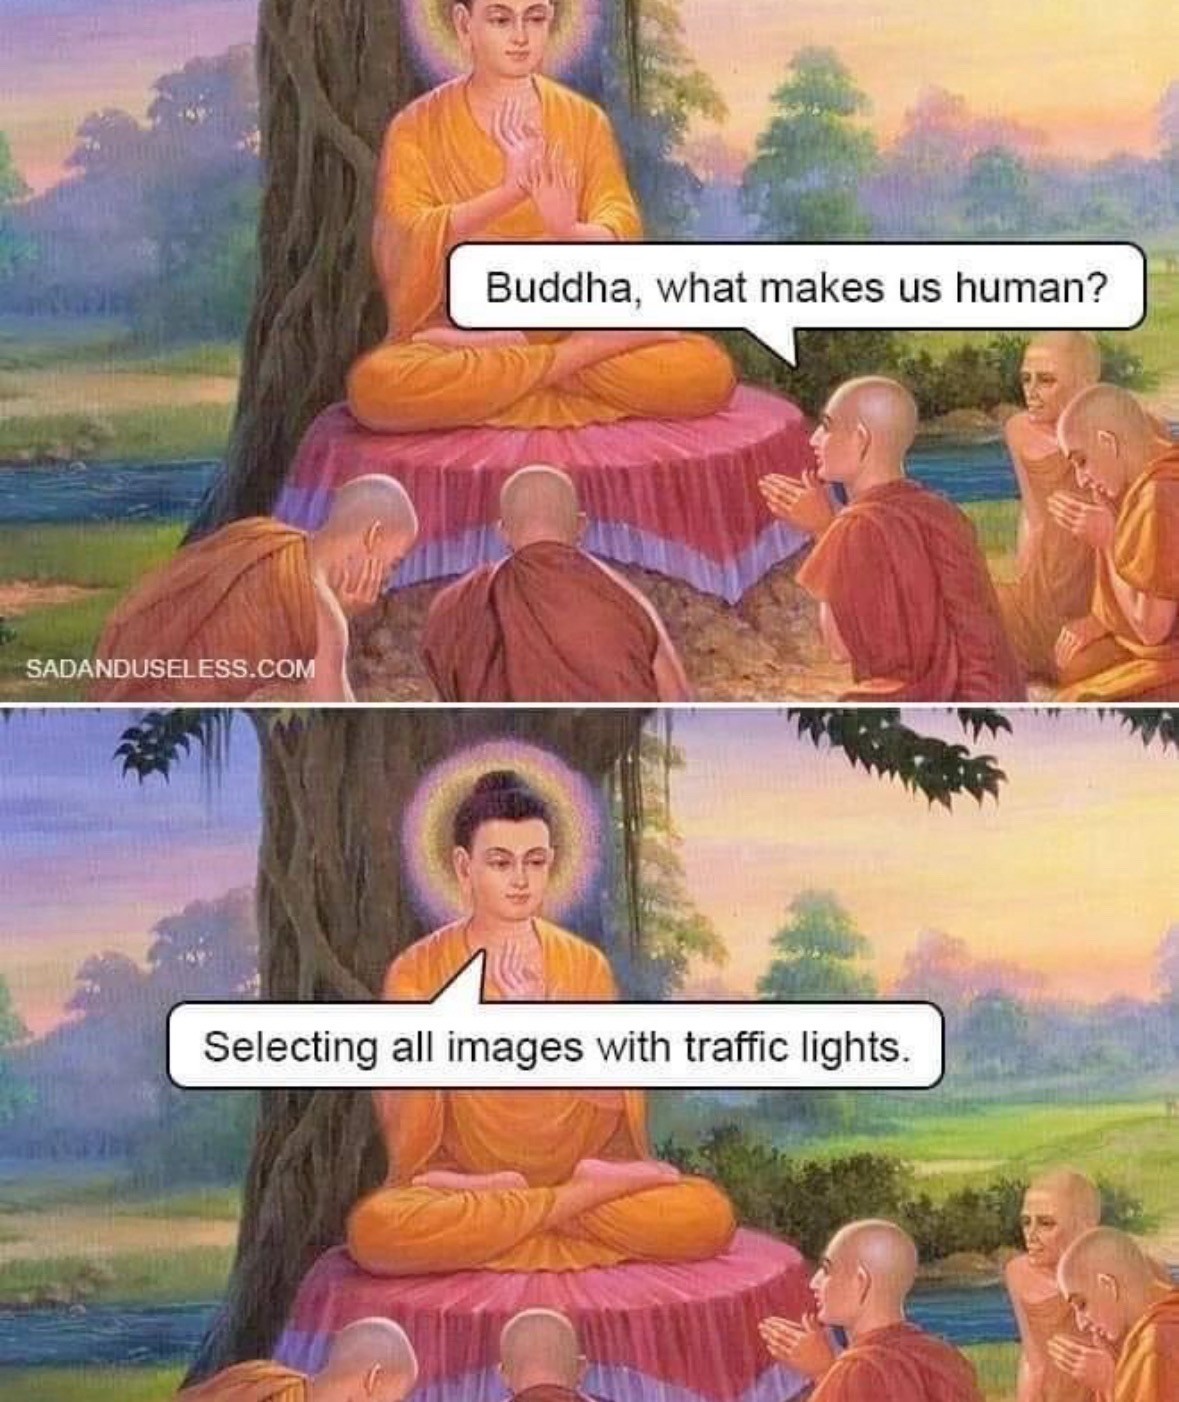 A humorous illustration depicting a figure representing Buddha, seated on a platform under a tree, surrounded by monks. One monk asks, "Buddha, what makes us human?" to which the figure humorously replies, "Selecting all images with traffic